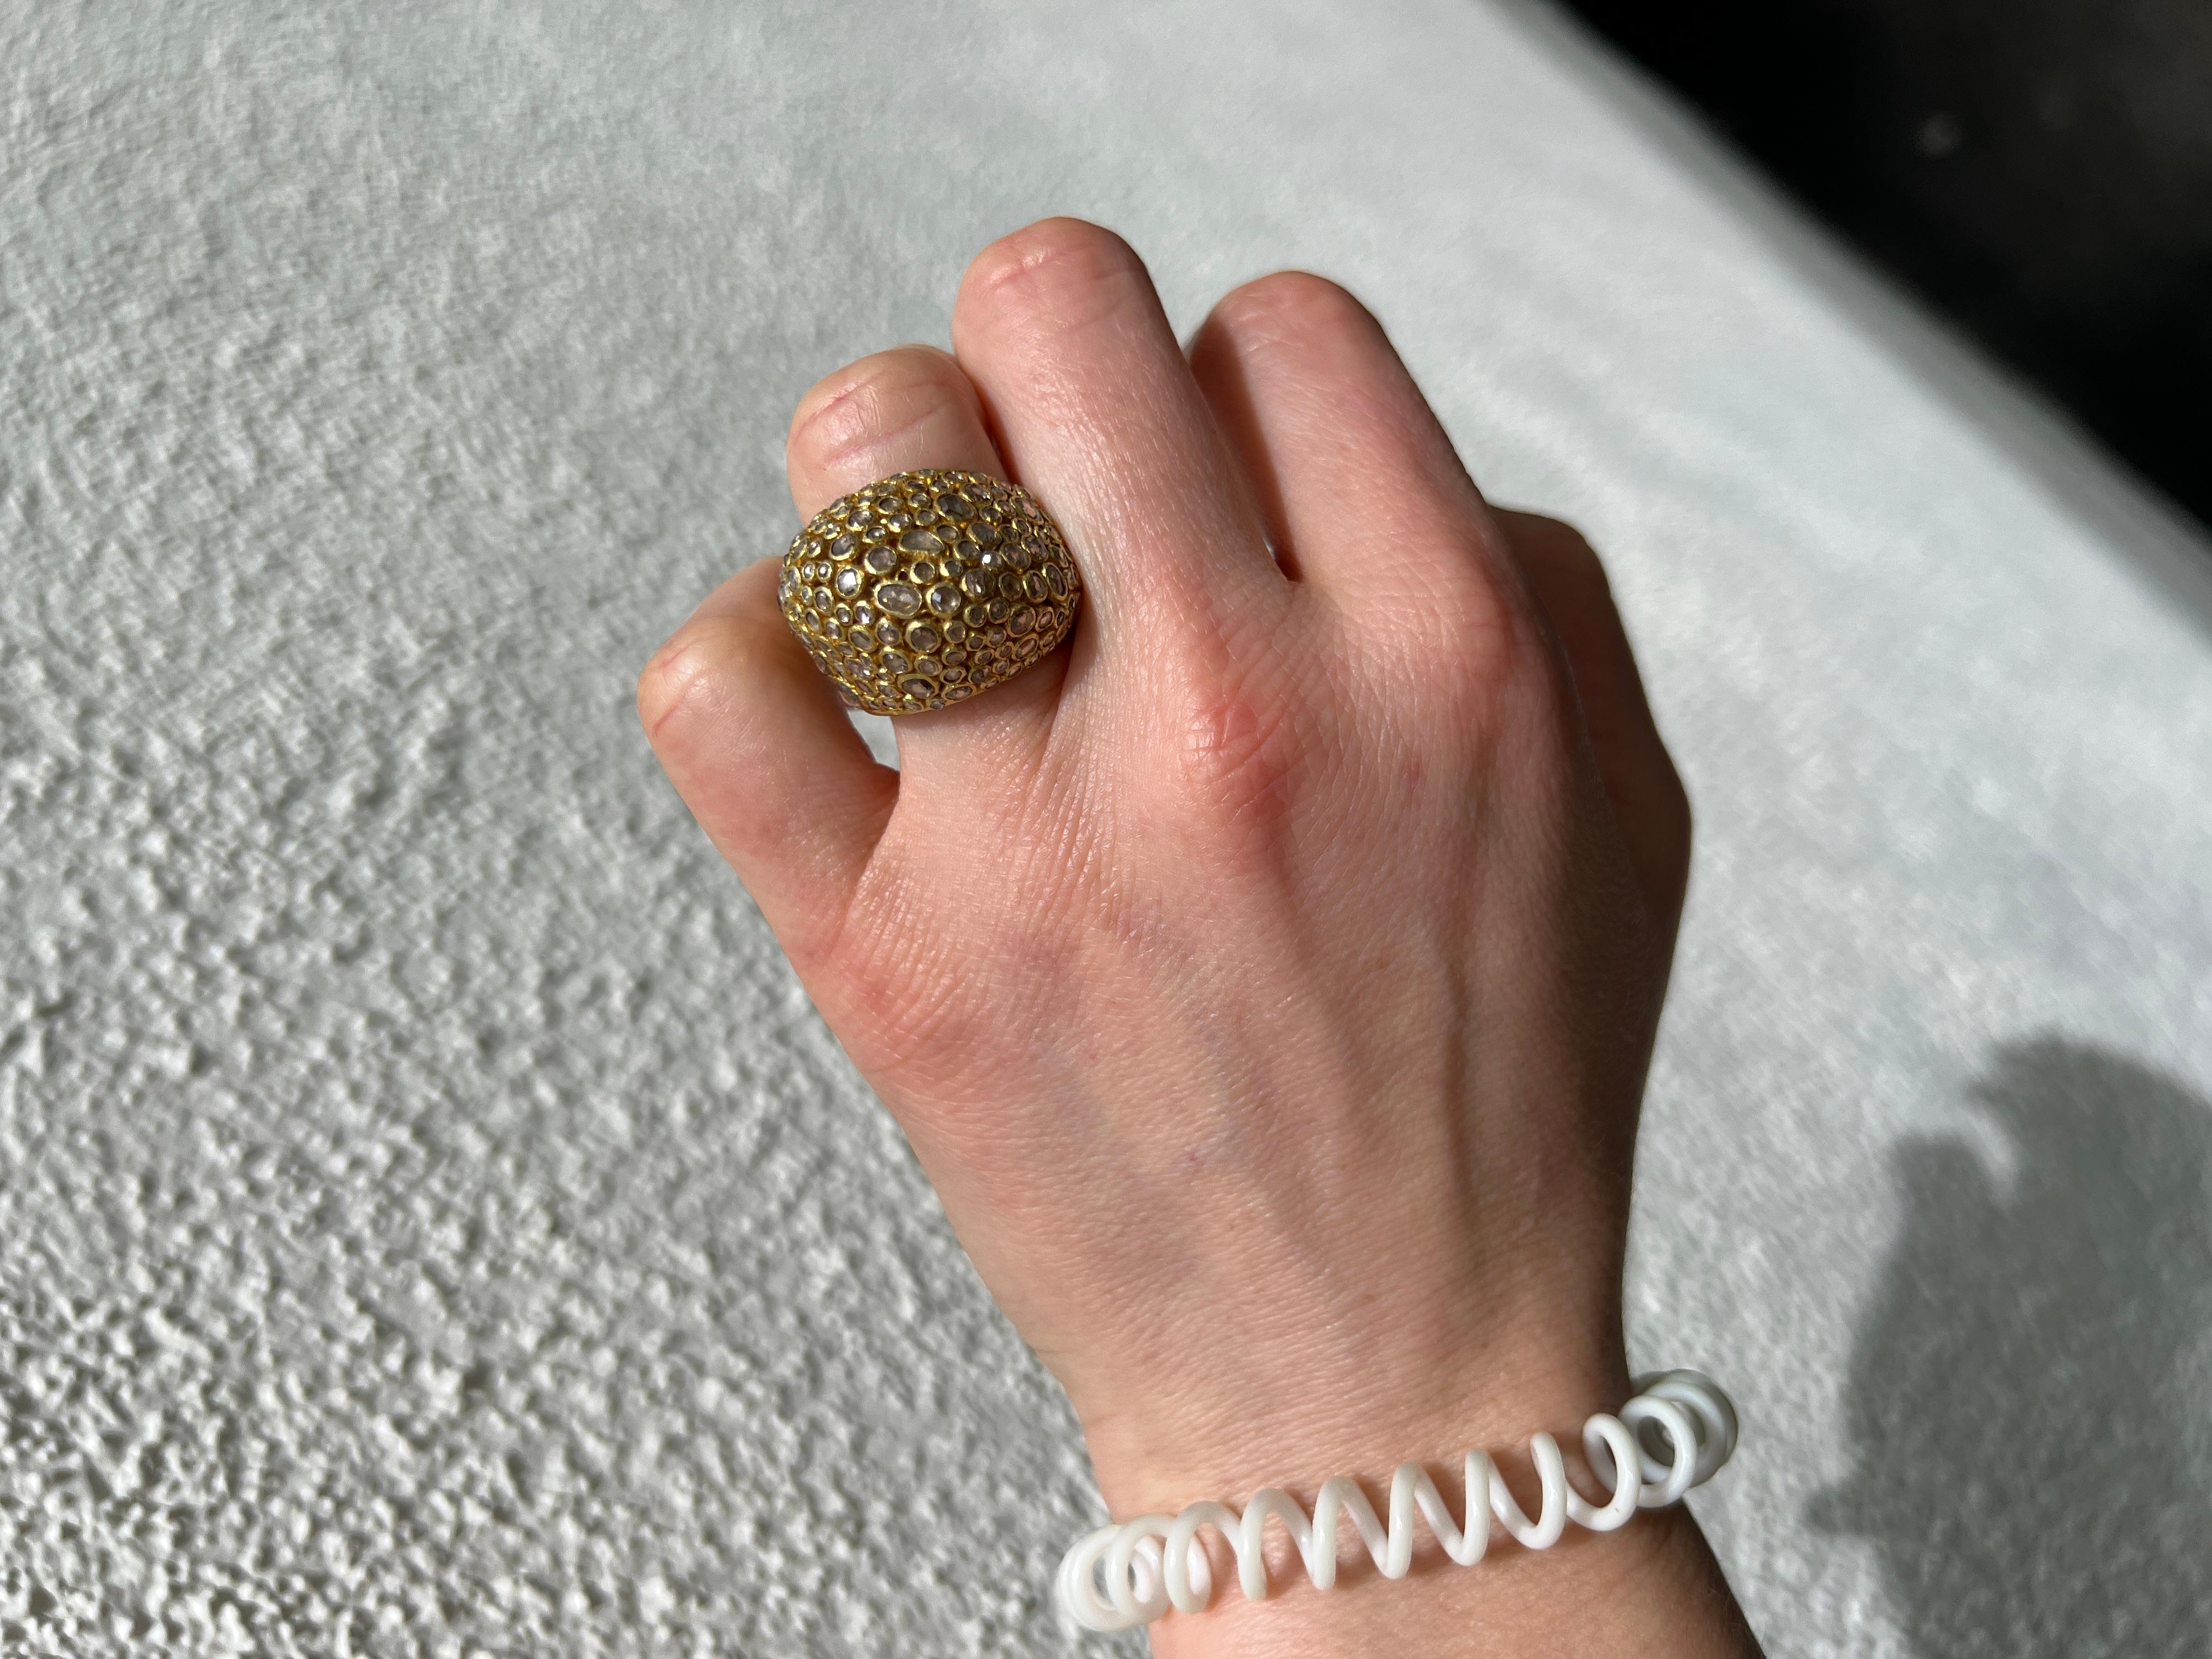 18 karat yellow gold diamond dome cocktail ring. Crafted with meticulous attention to detail, this one-of-a-kind piece boasts a captivating woven design of circles and swirls, exuding sophistication and charm.
Adorned with delicate rose-cut